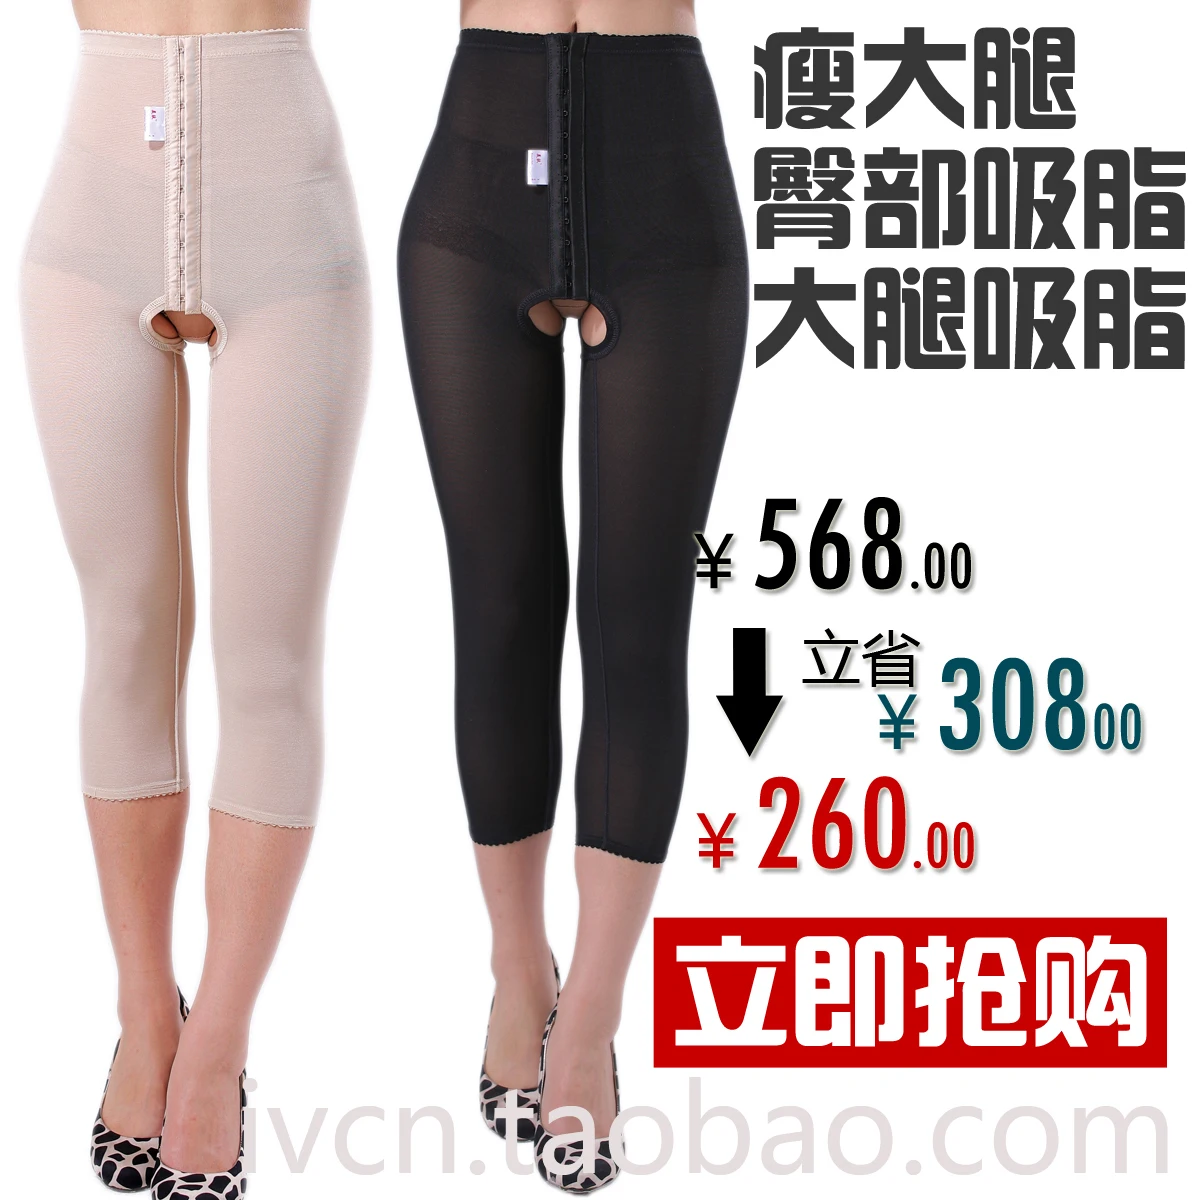 slimming pants for big thighs